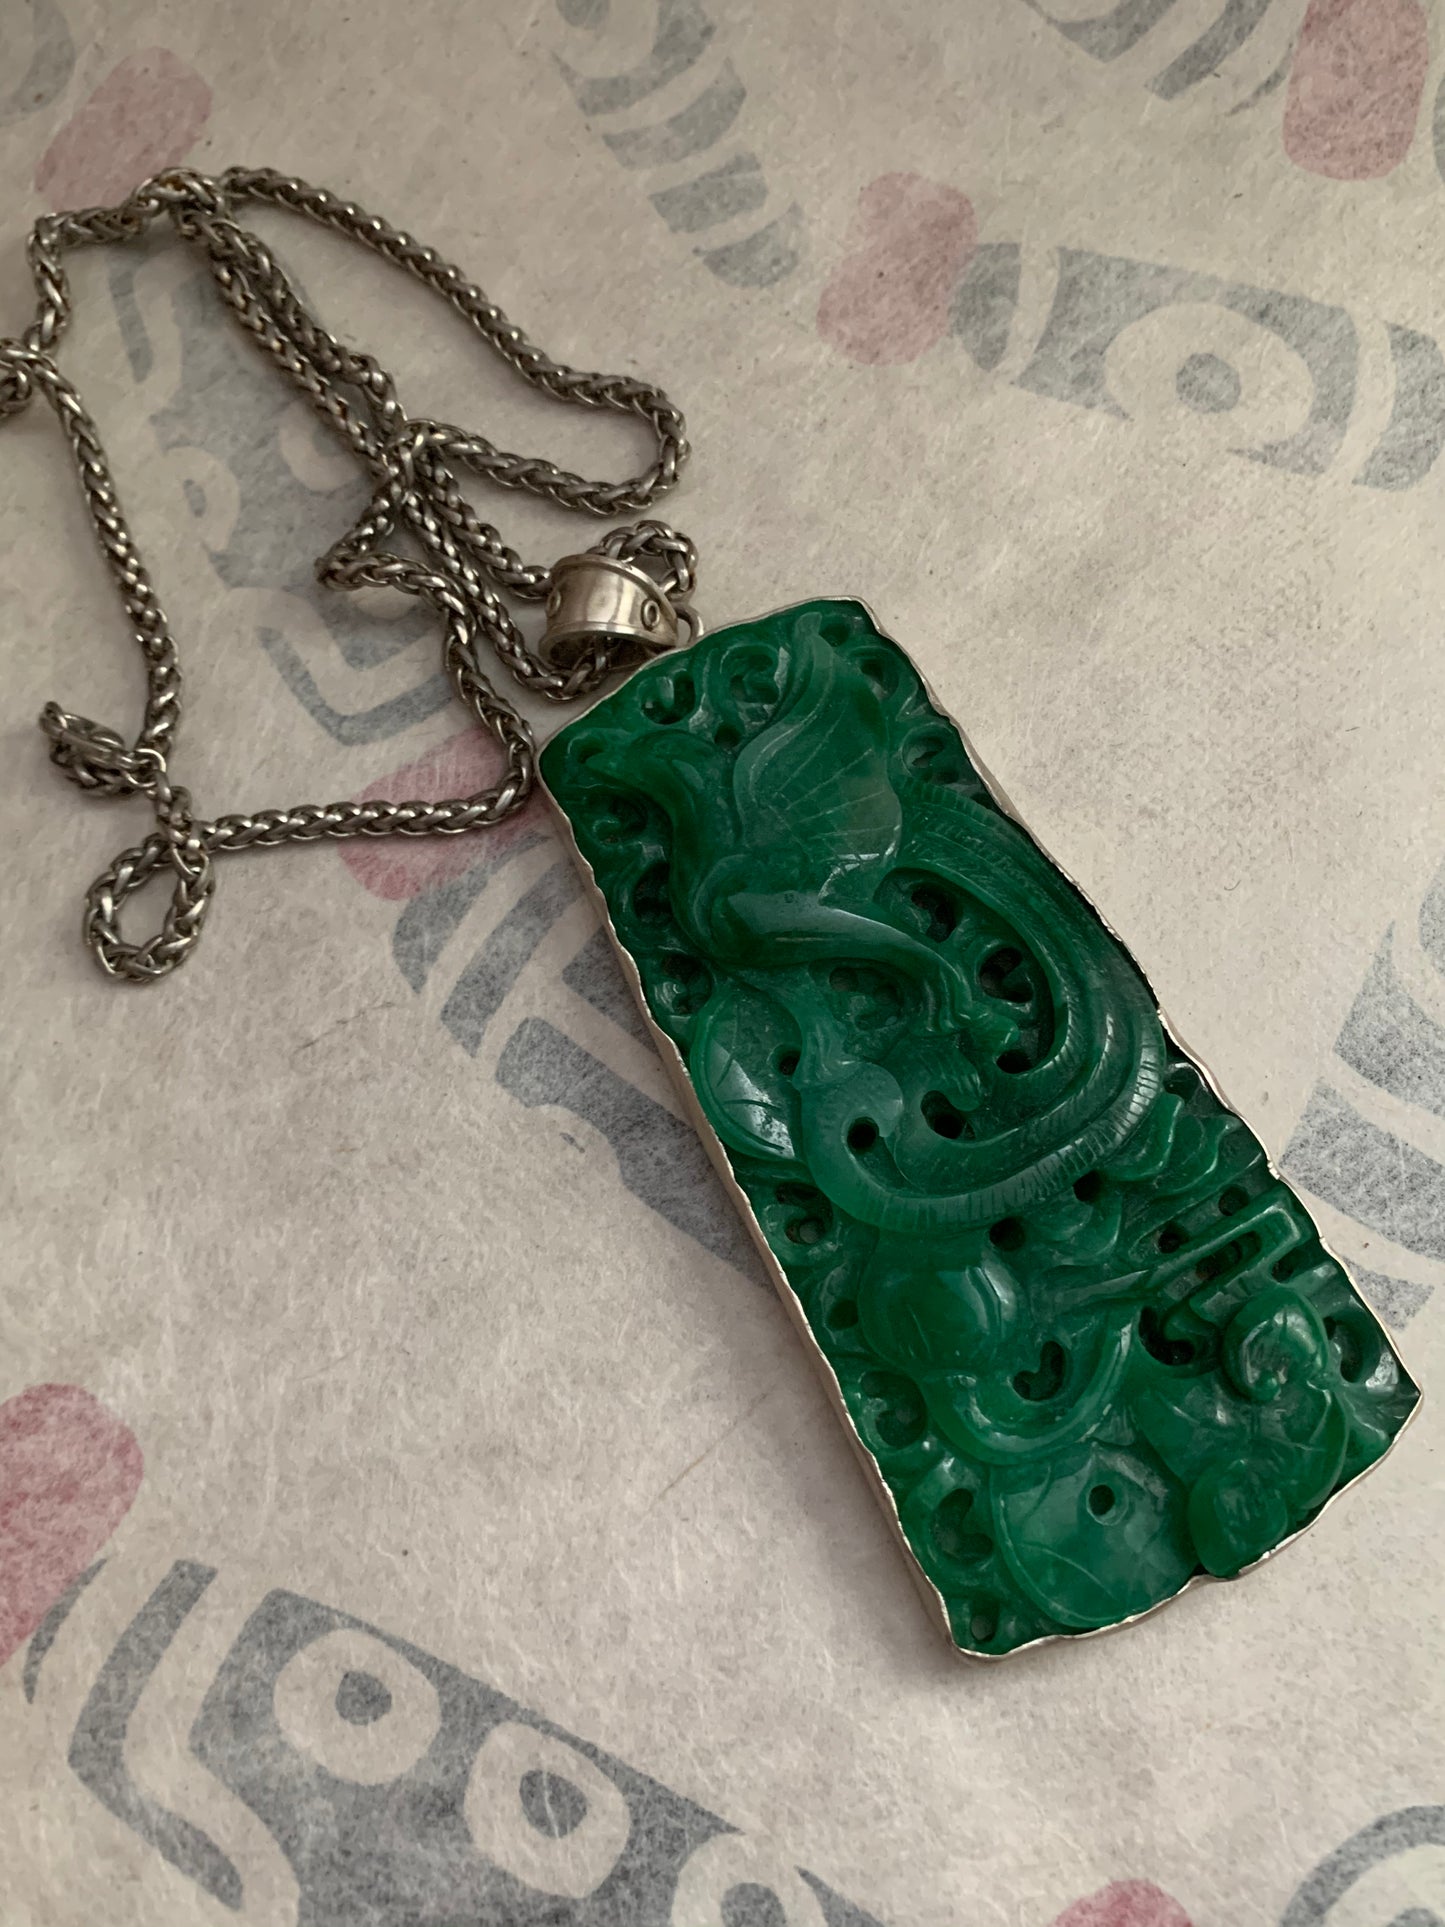 A jade and silver pendant